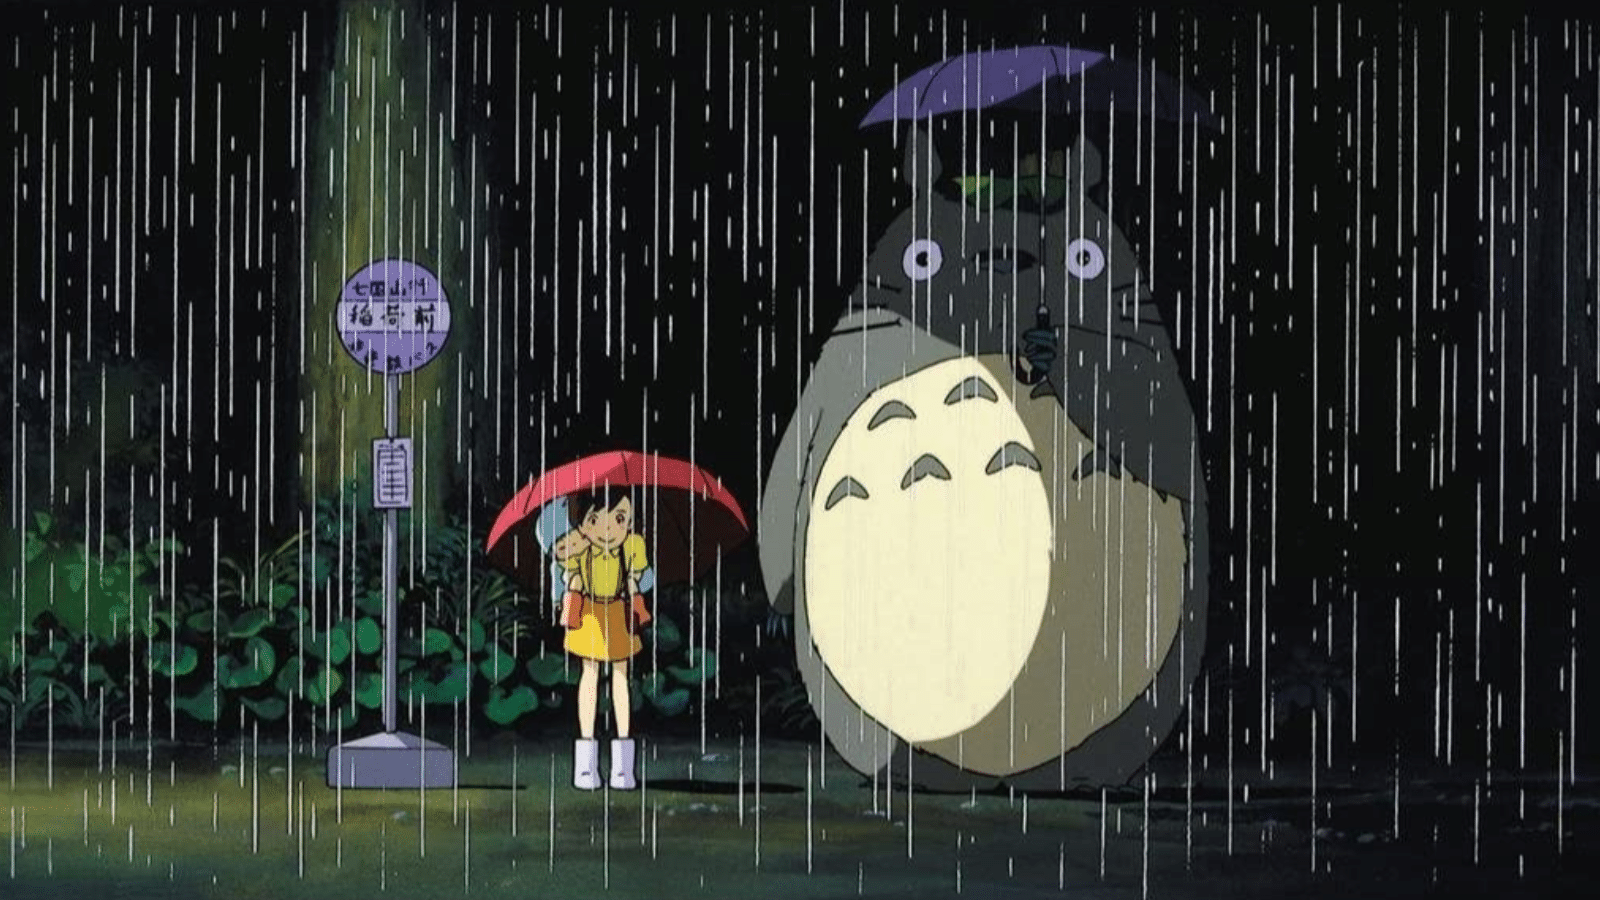 <p><em>My Neighbor Totoro</em> is a film about two sisters who move to the countryside with their father. As they explore their new home, they encounter magical creatures who keep them company while in the town.</p> <p>It's a delightful tale filled with friendship, imagination, and wonders of nature.</p>